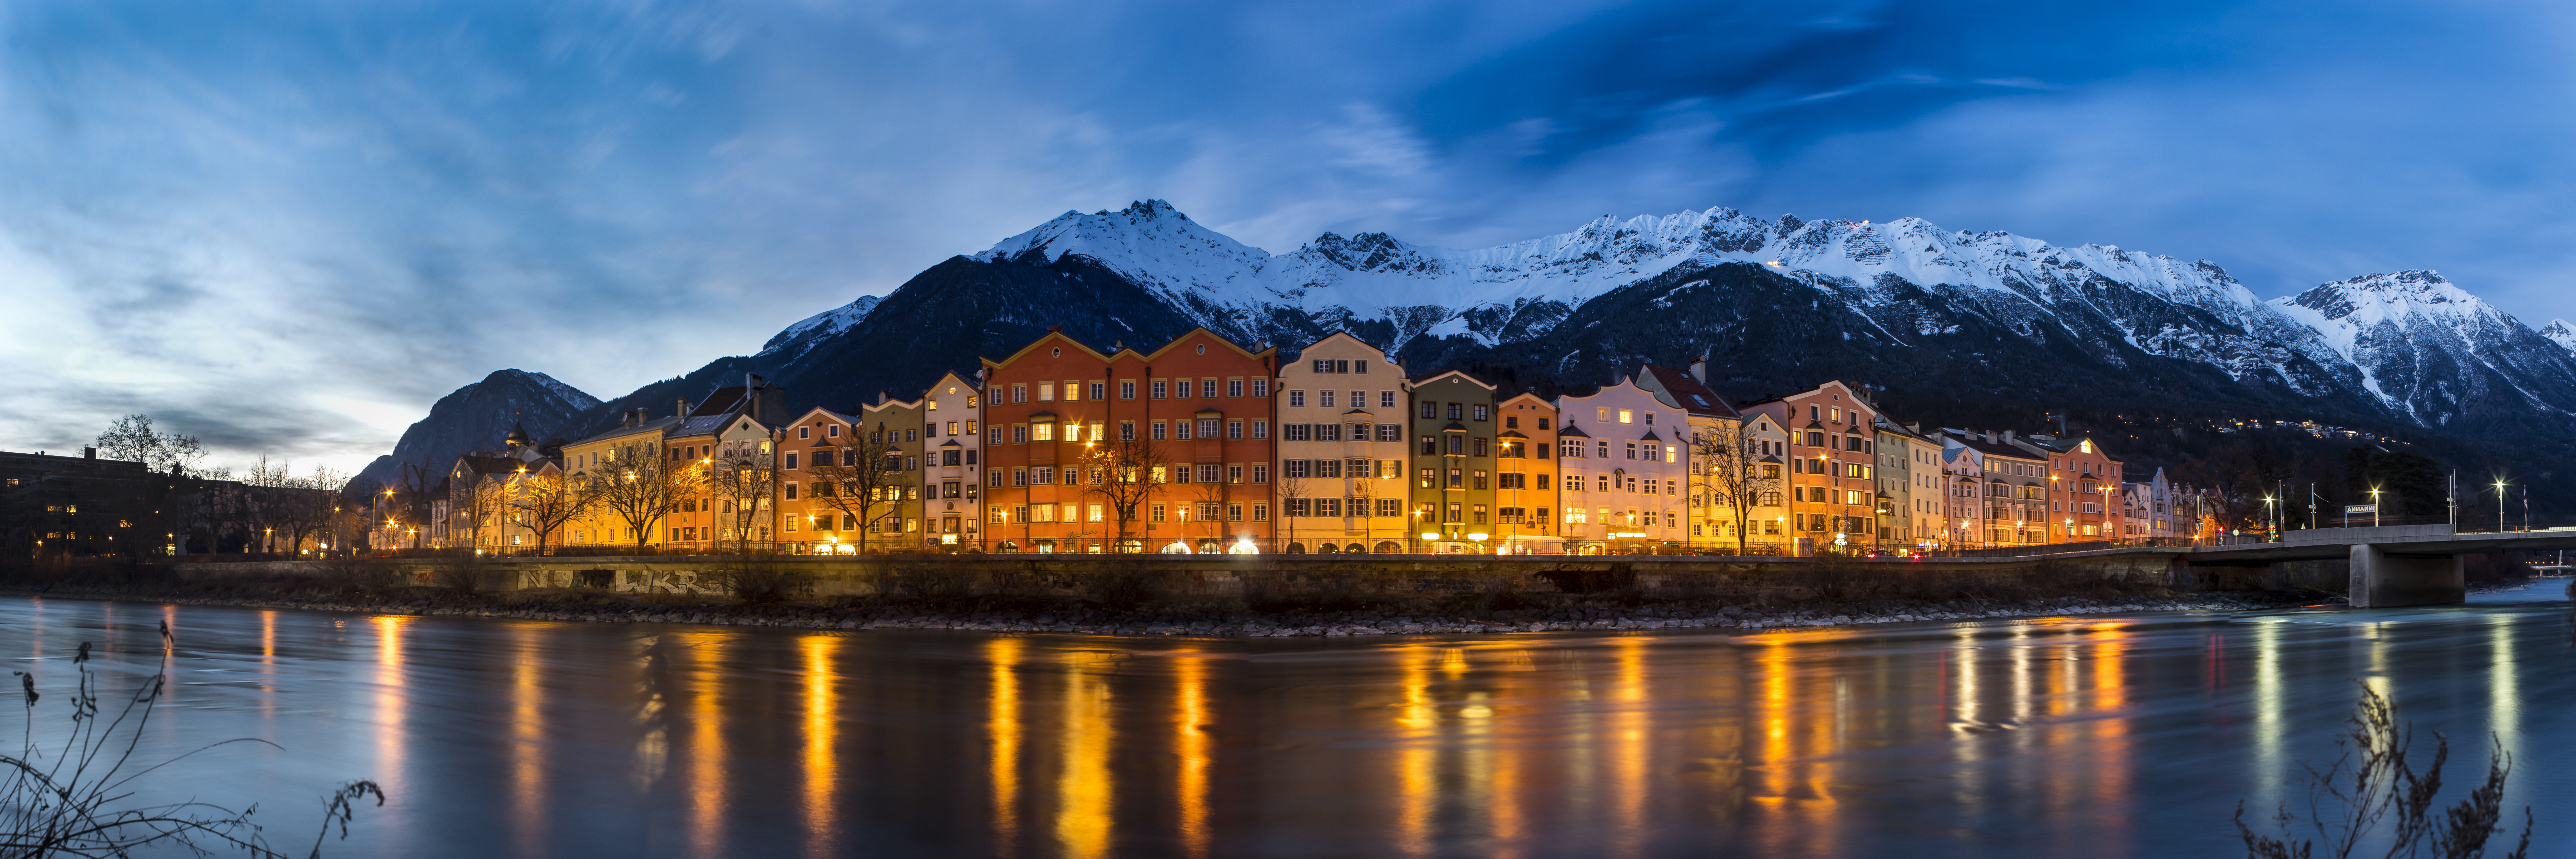 A trip to Innsbruck and its surrounding region